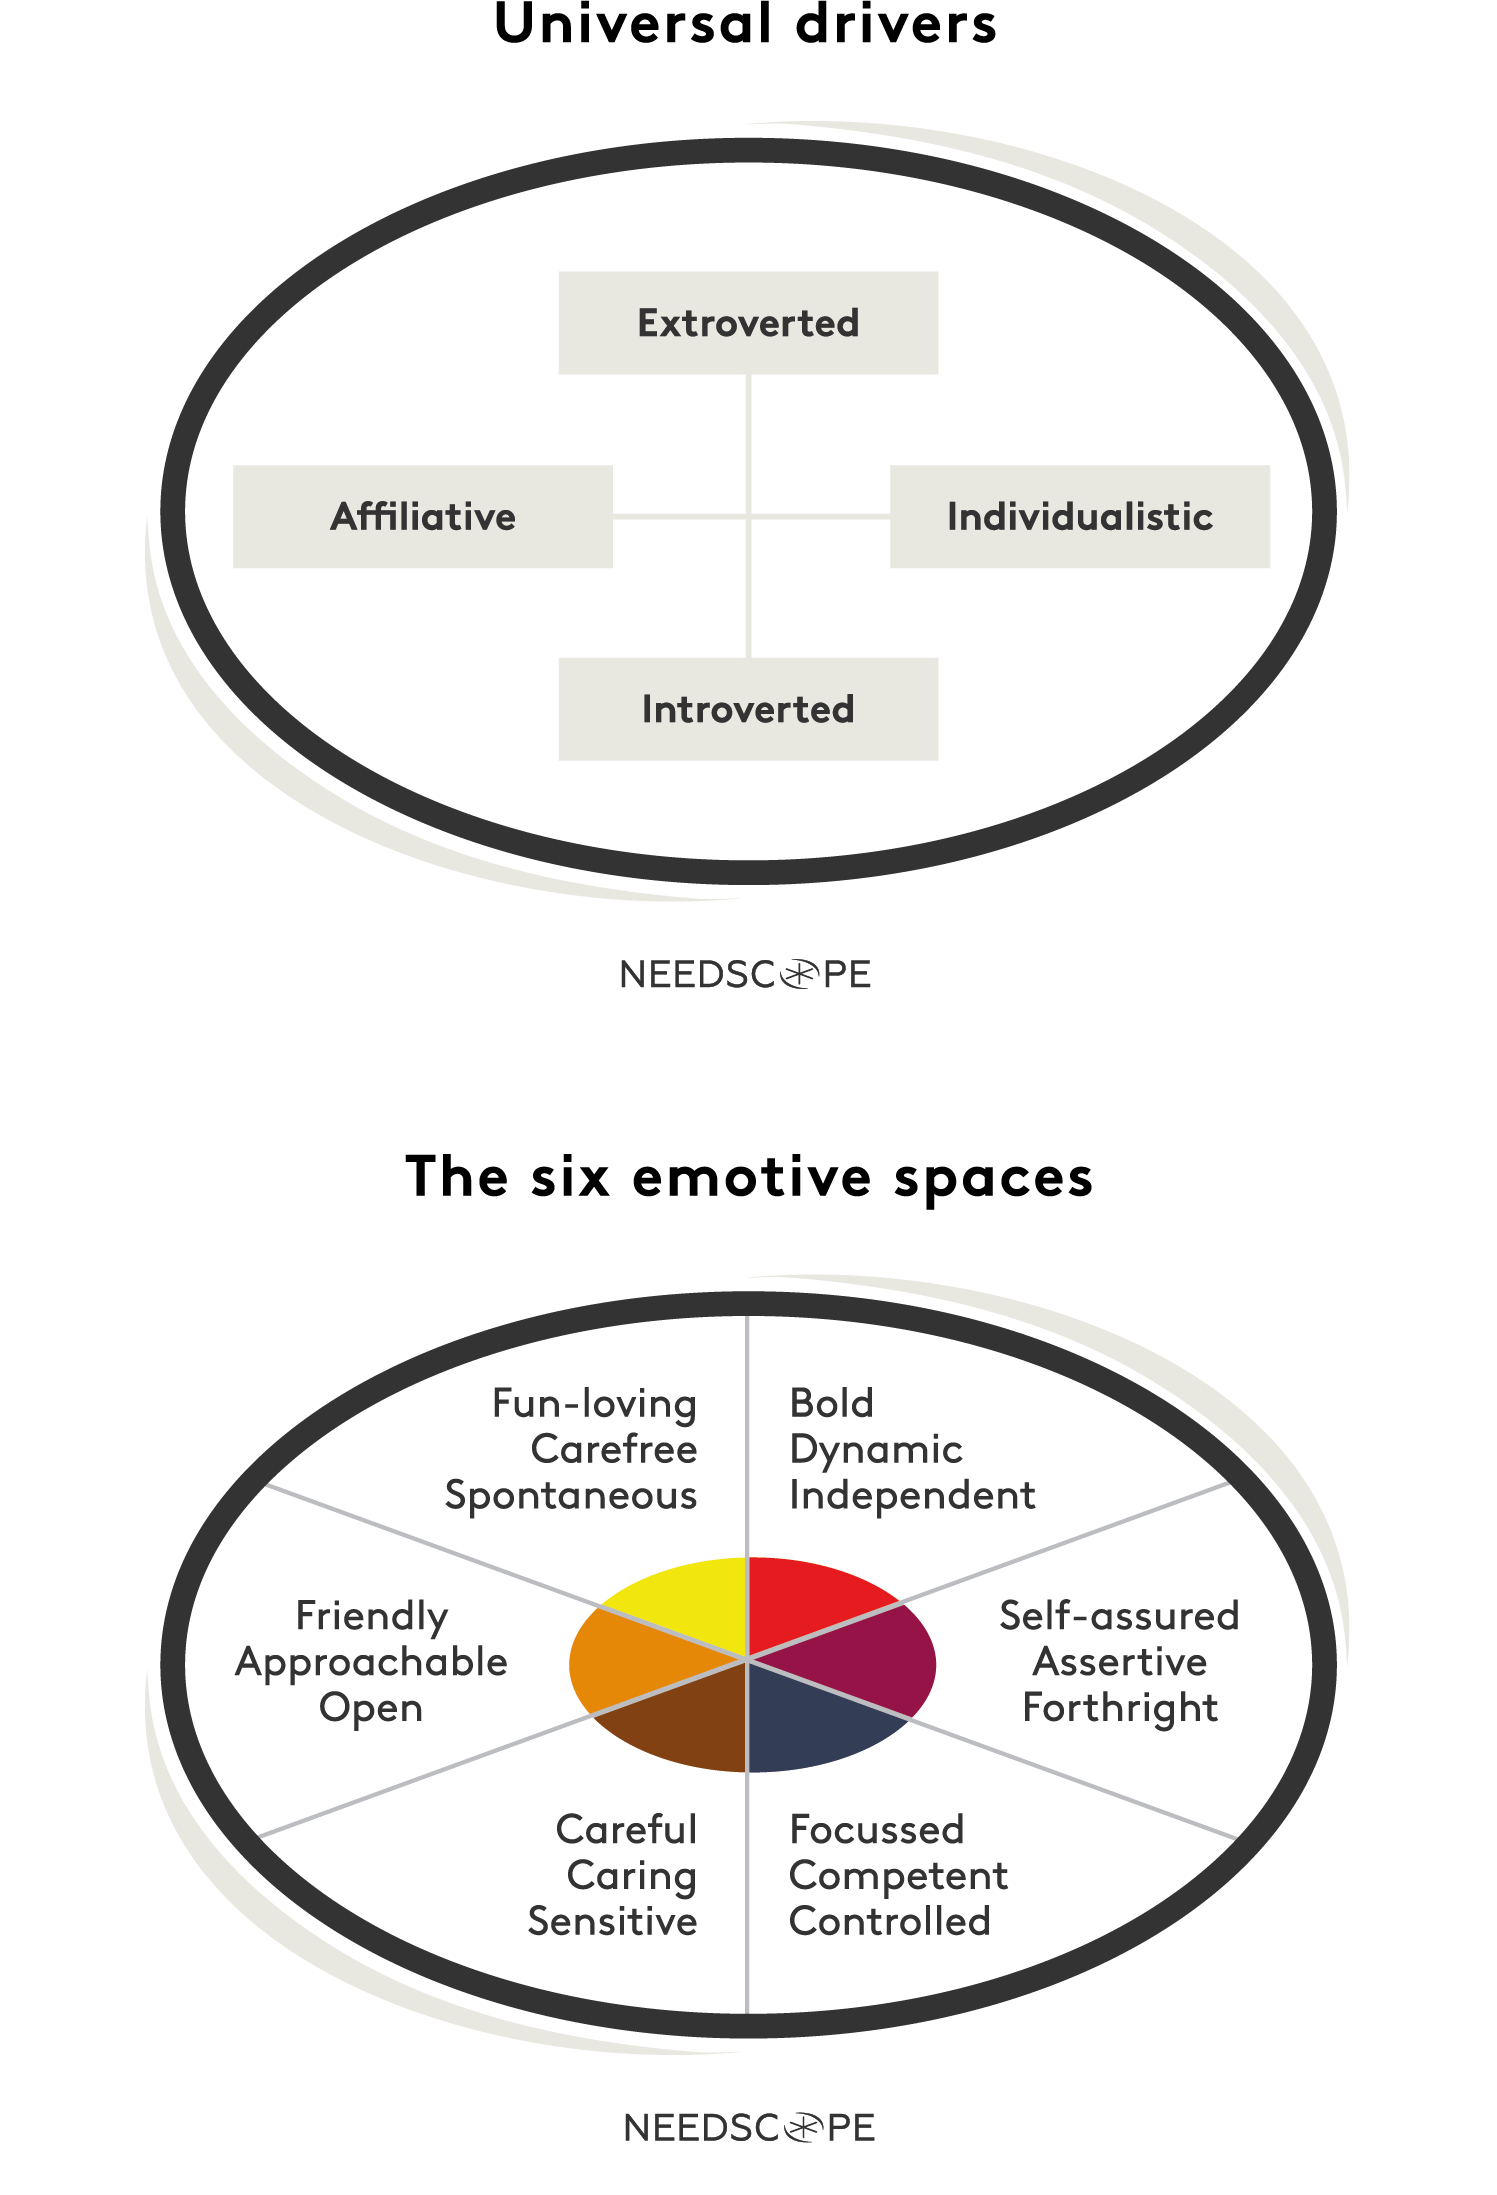 Universal drivers and The six emotive spaces